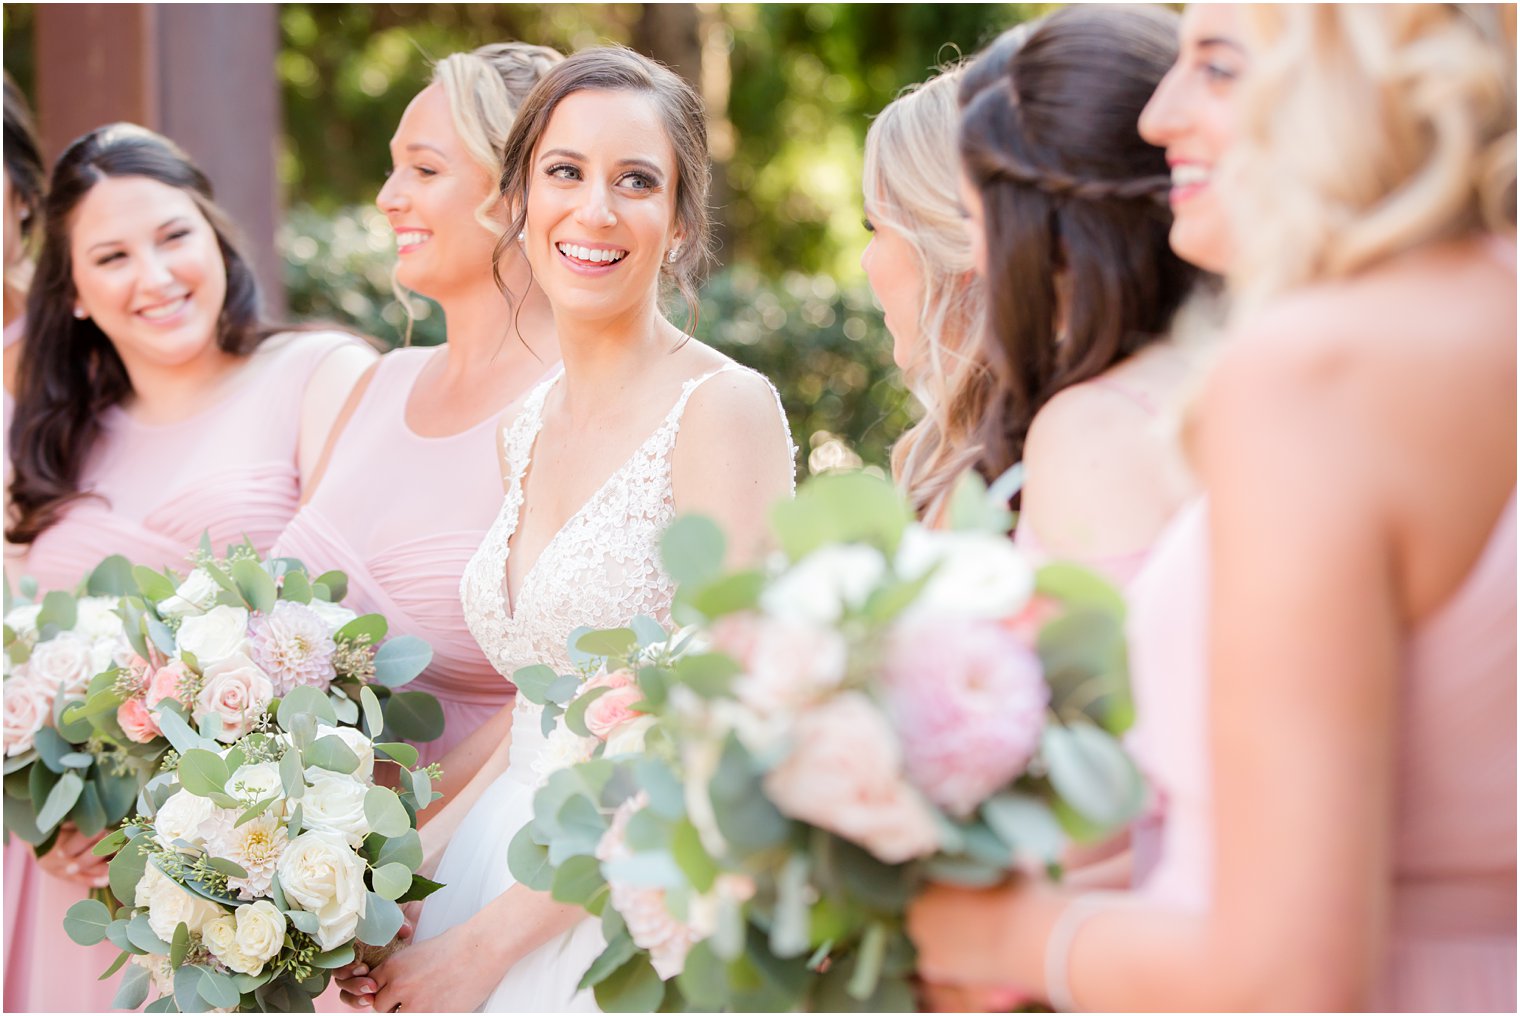 Candid photo of bride and bridesmaids 